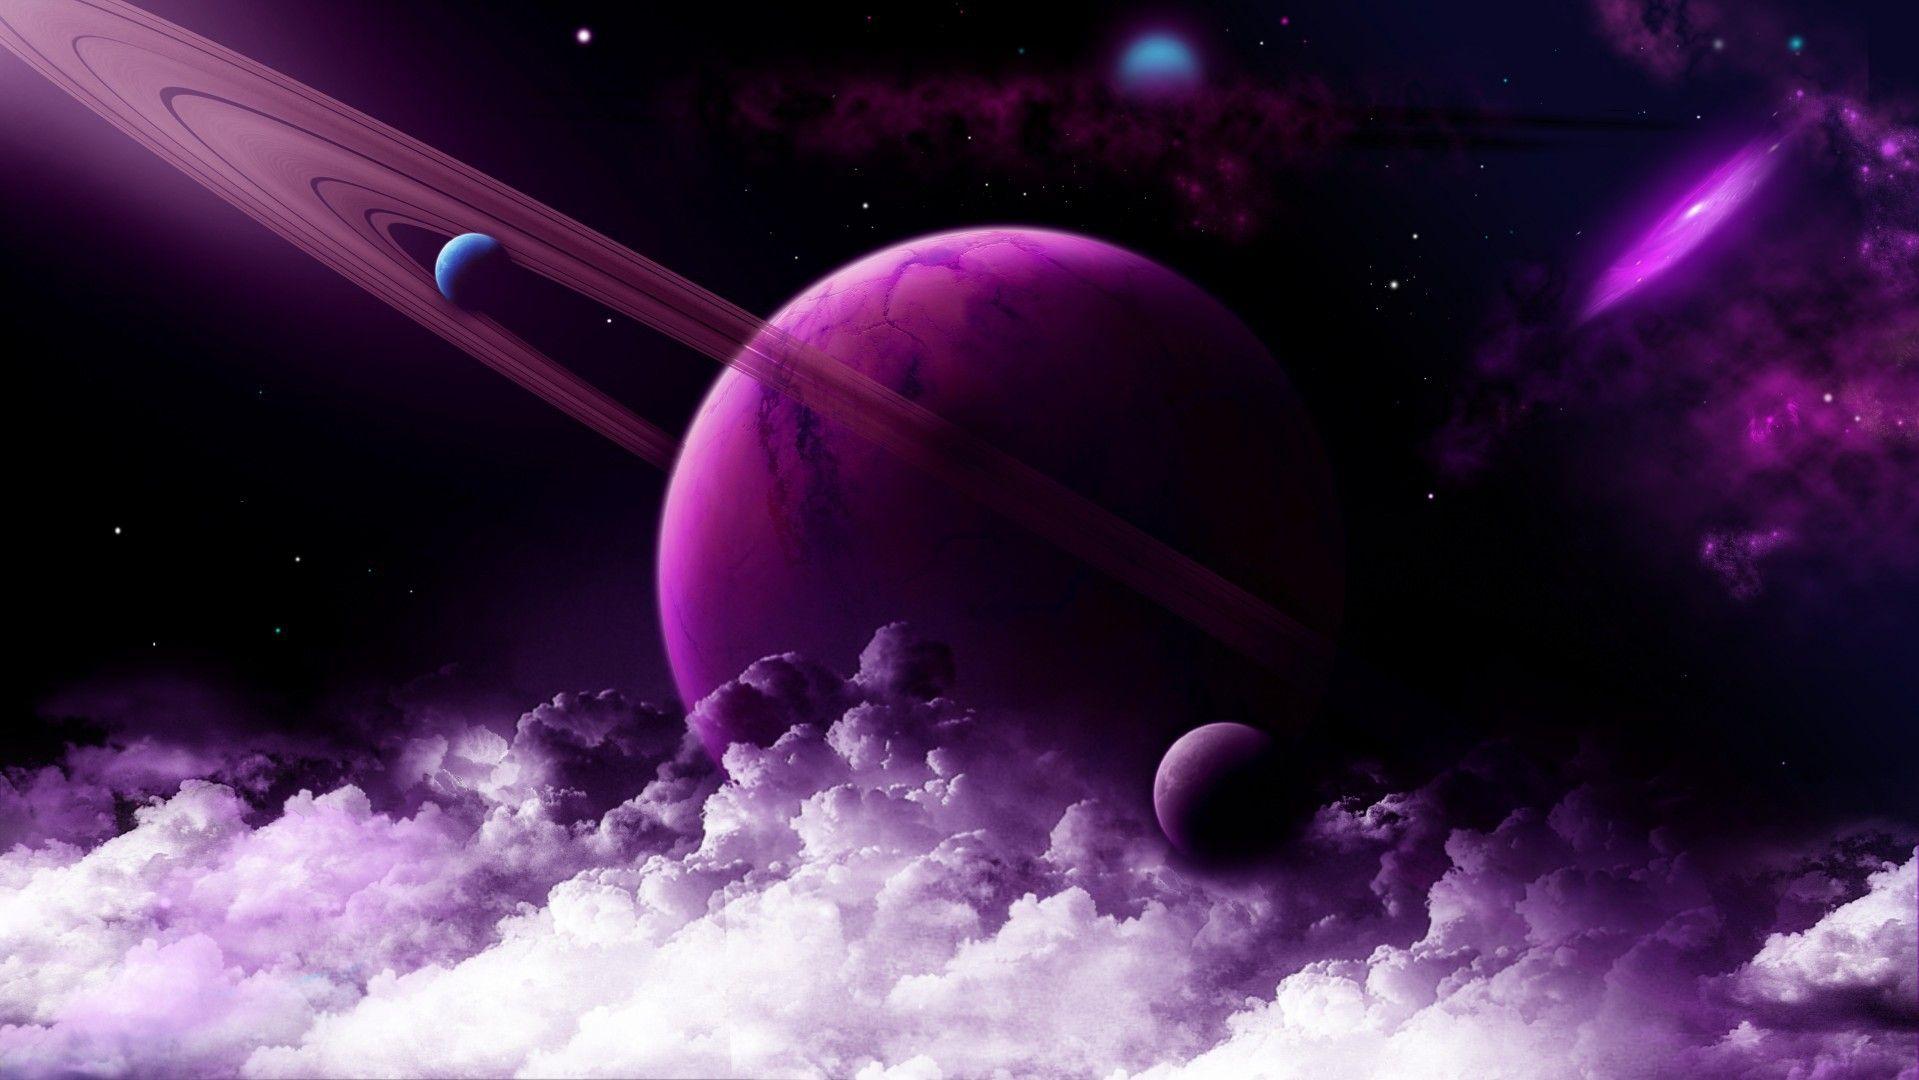 Purple space wallpaper and image, picture, photo